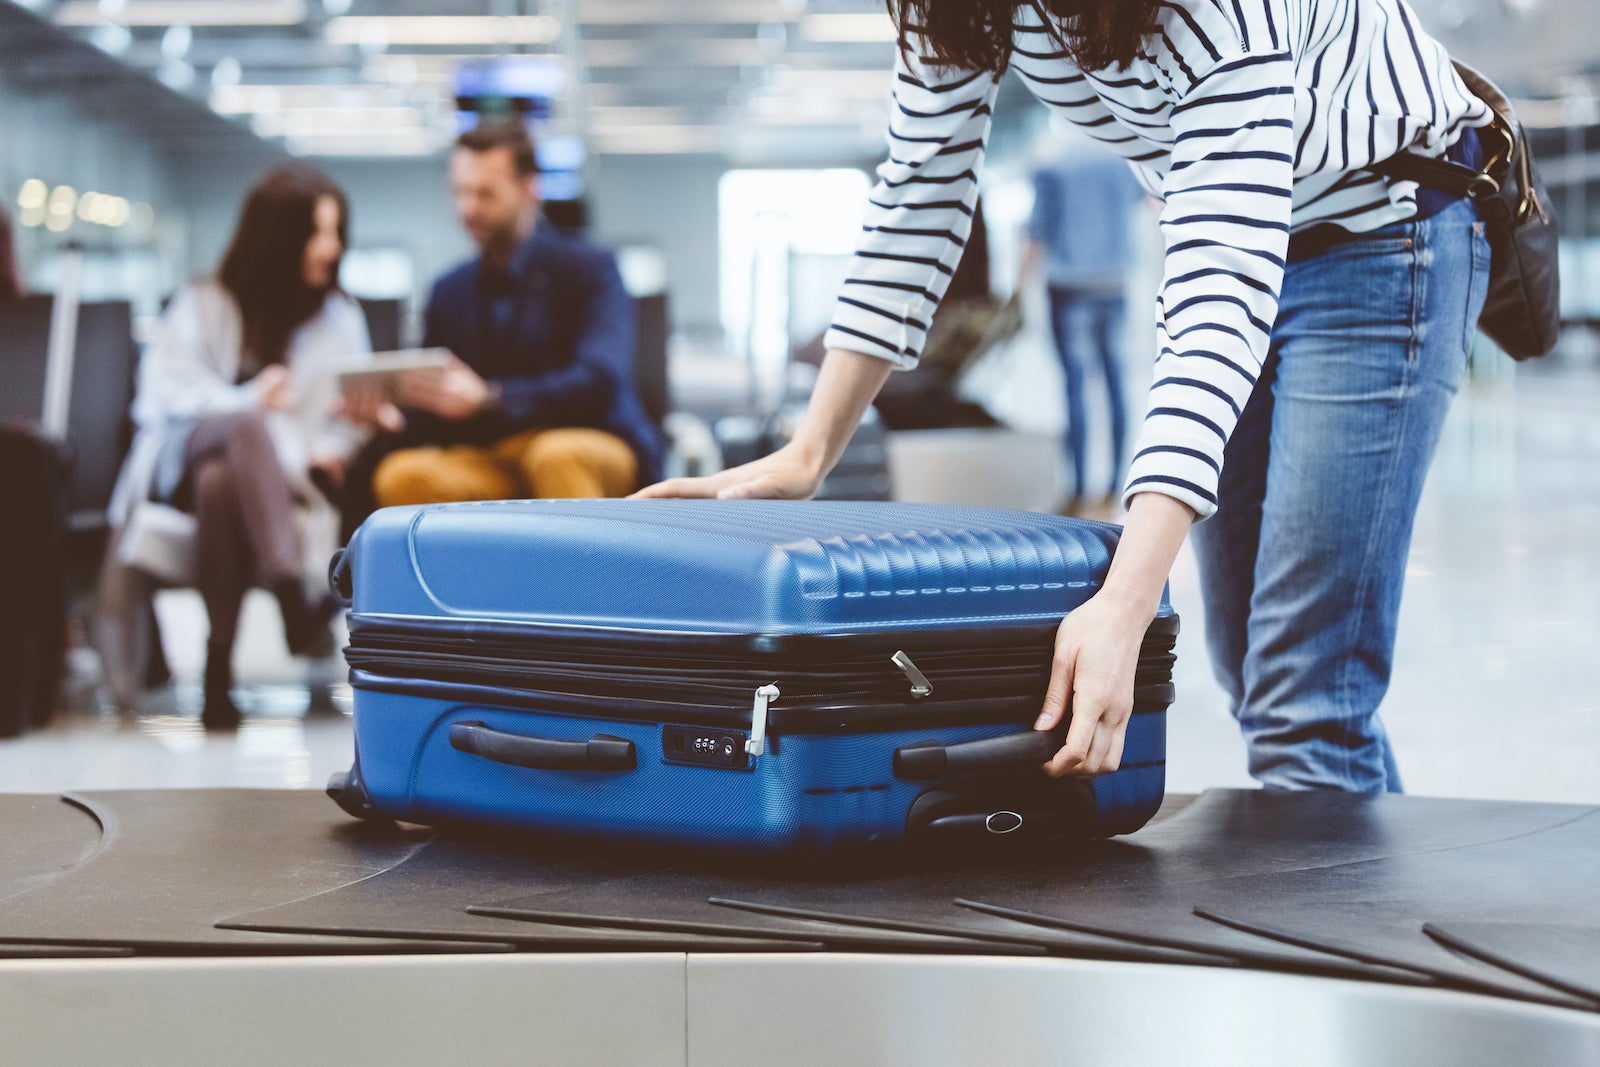 an unidentified person reaches for a blue suitcase on a conveyor belt